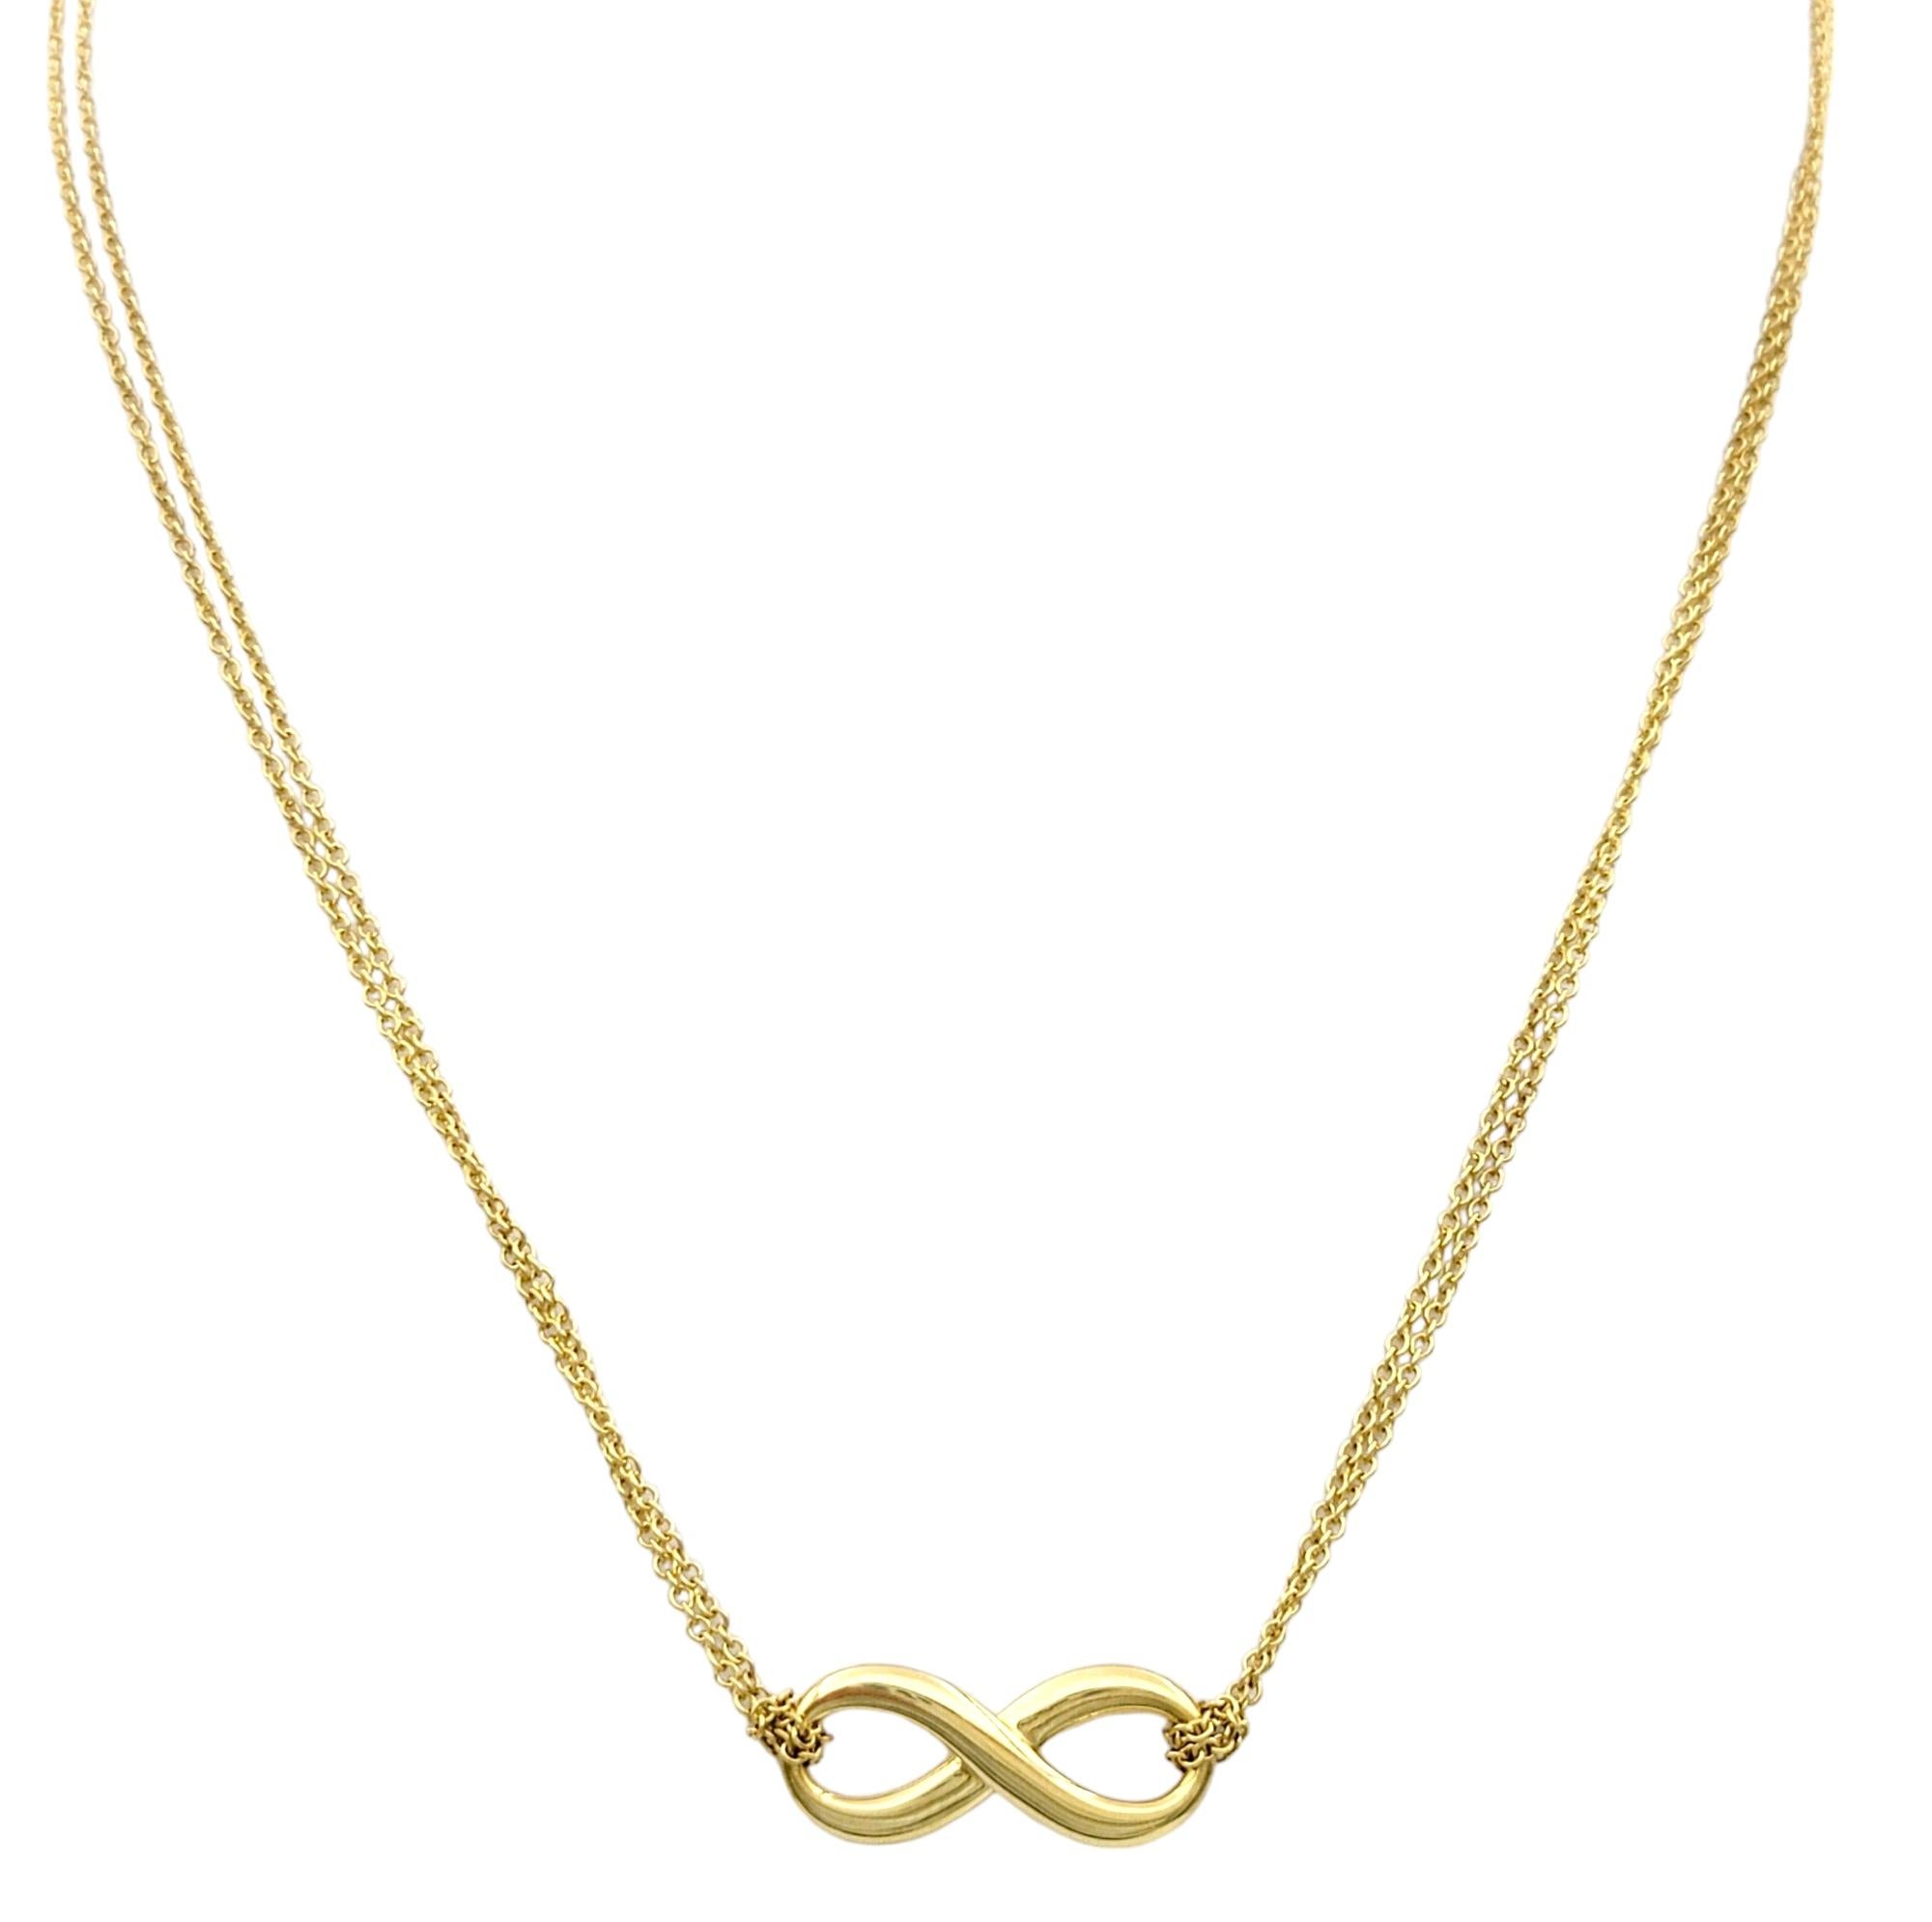 Tiffany & Co. Double Chain Infinity Pendant Necklace Set in 18 Karat Yellow Gold In Good Condition For Sale In Scottsdale, AZ